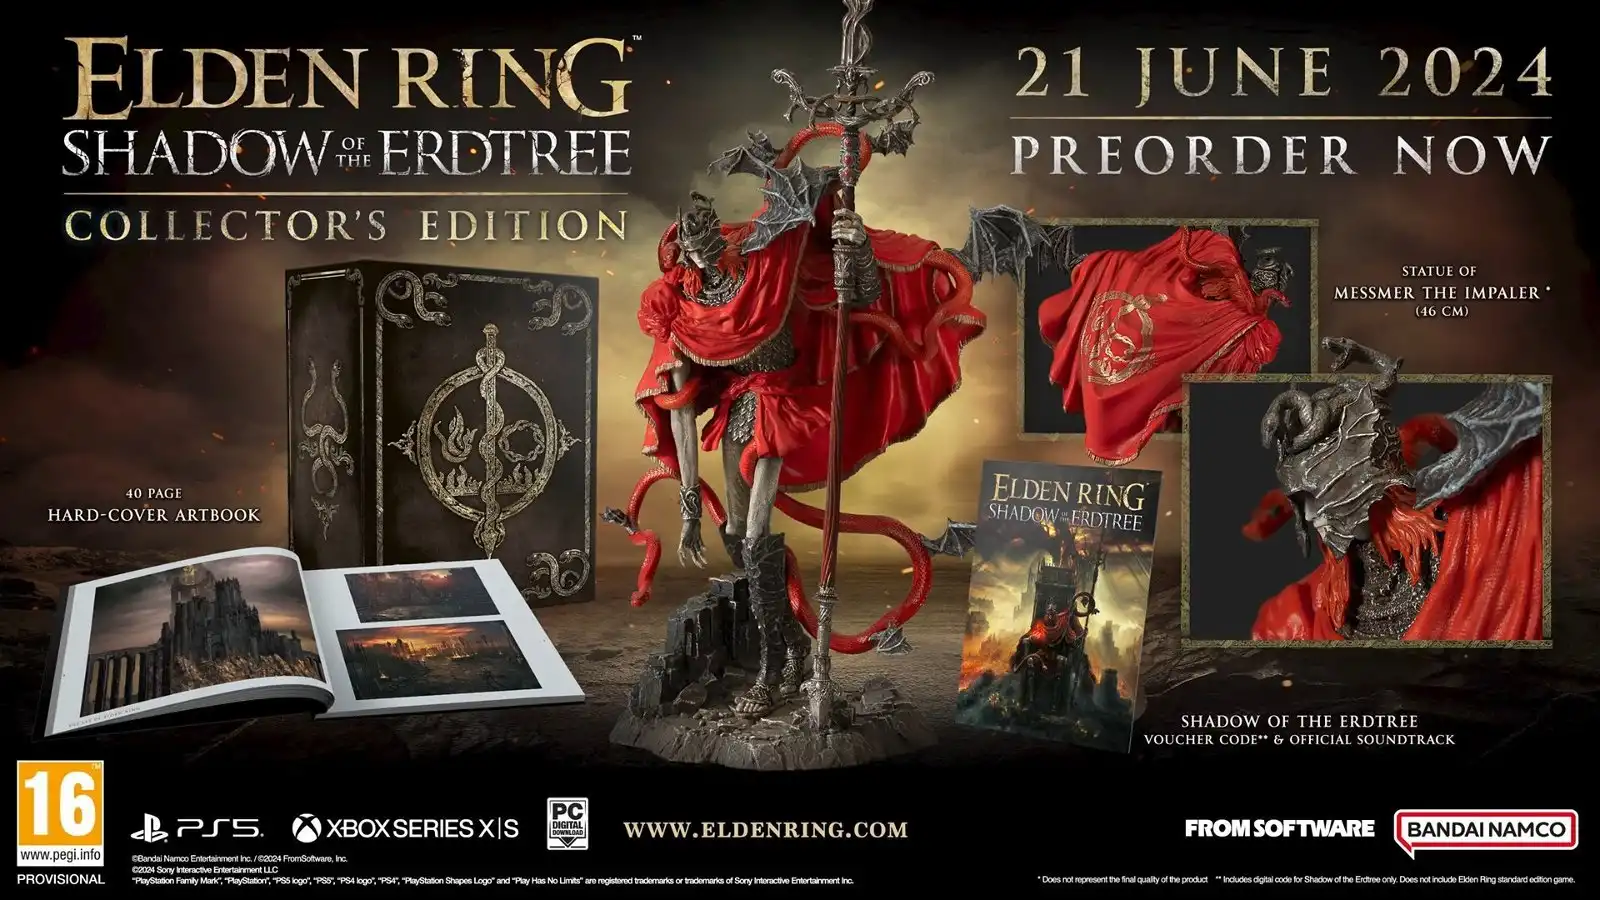 Elden Ring Shadow of the Erdtree Collector's Edition - Revealed and Available for Pre-Order